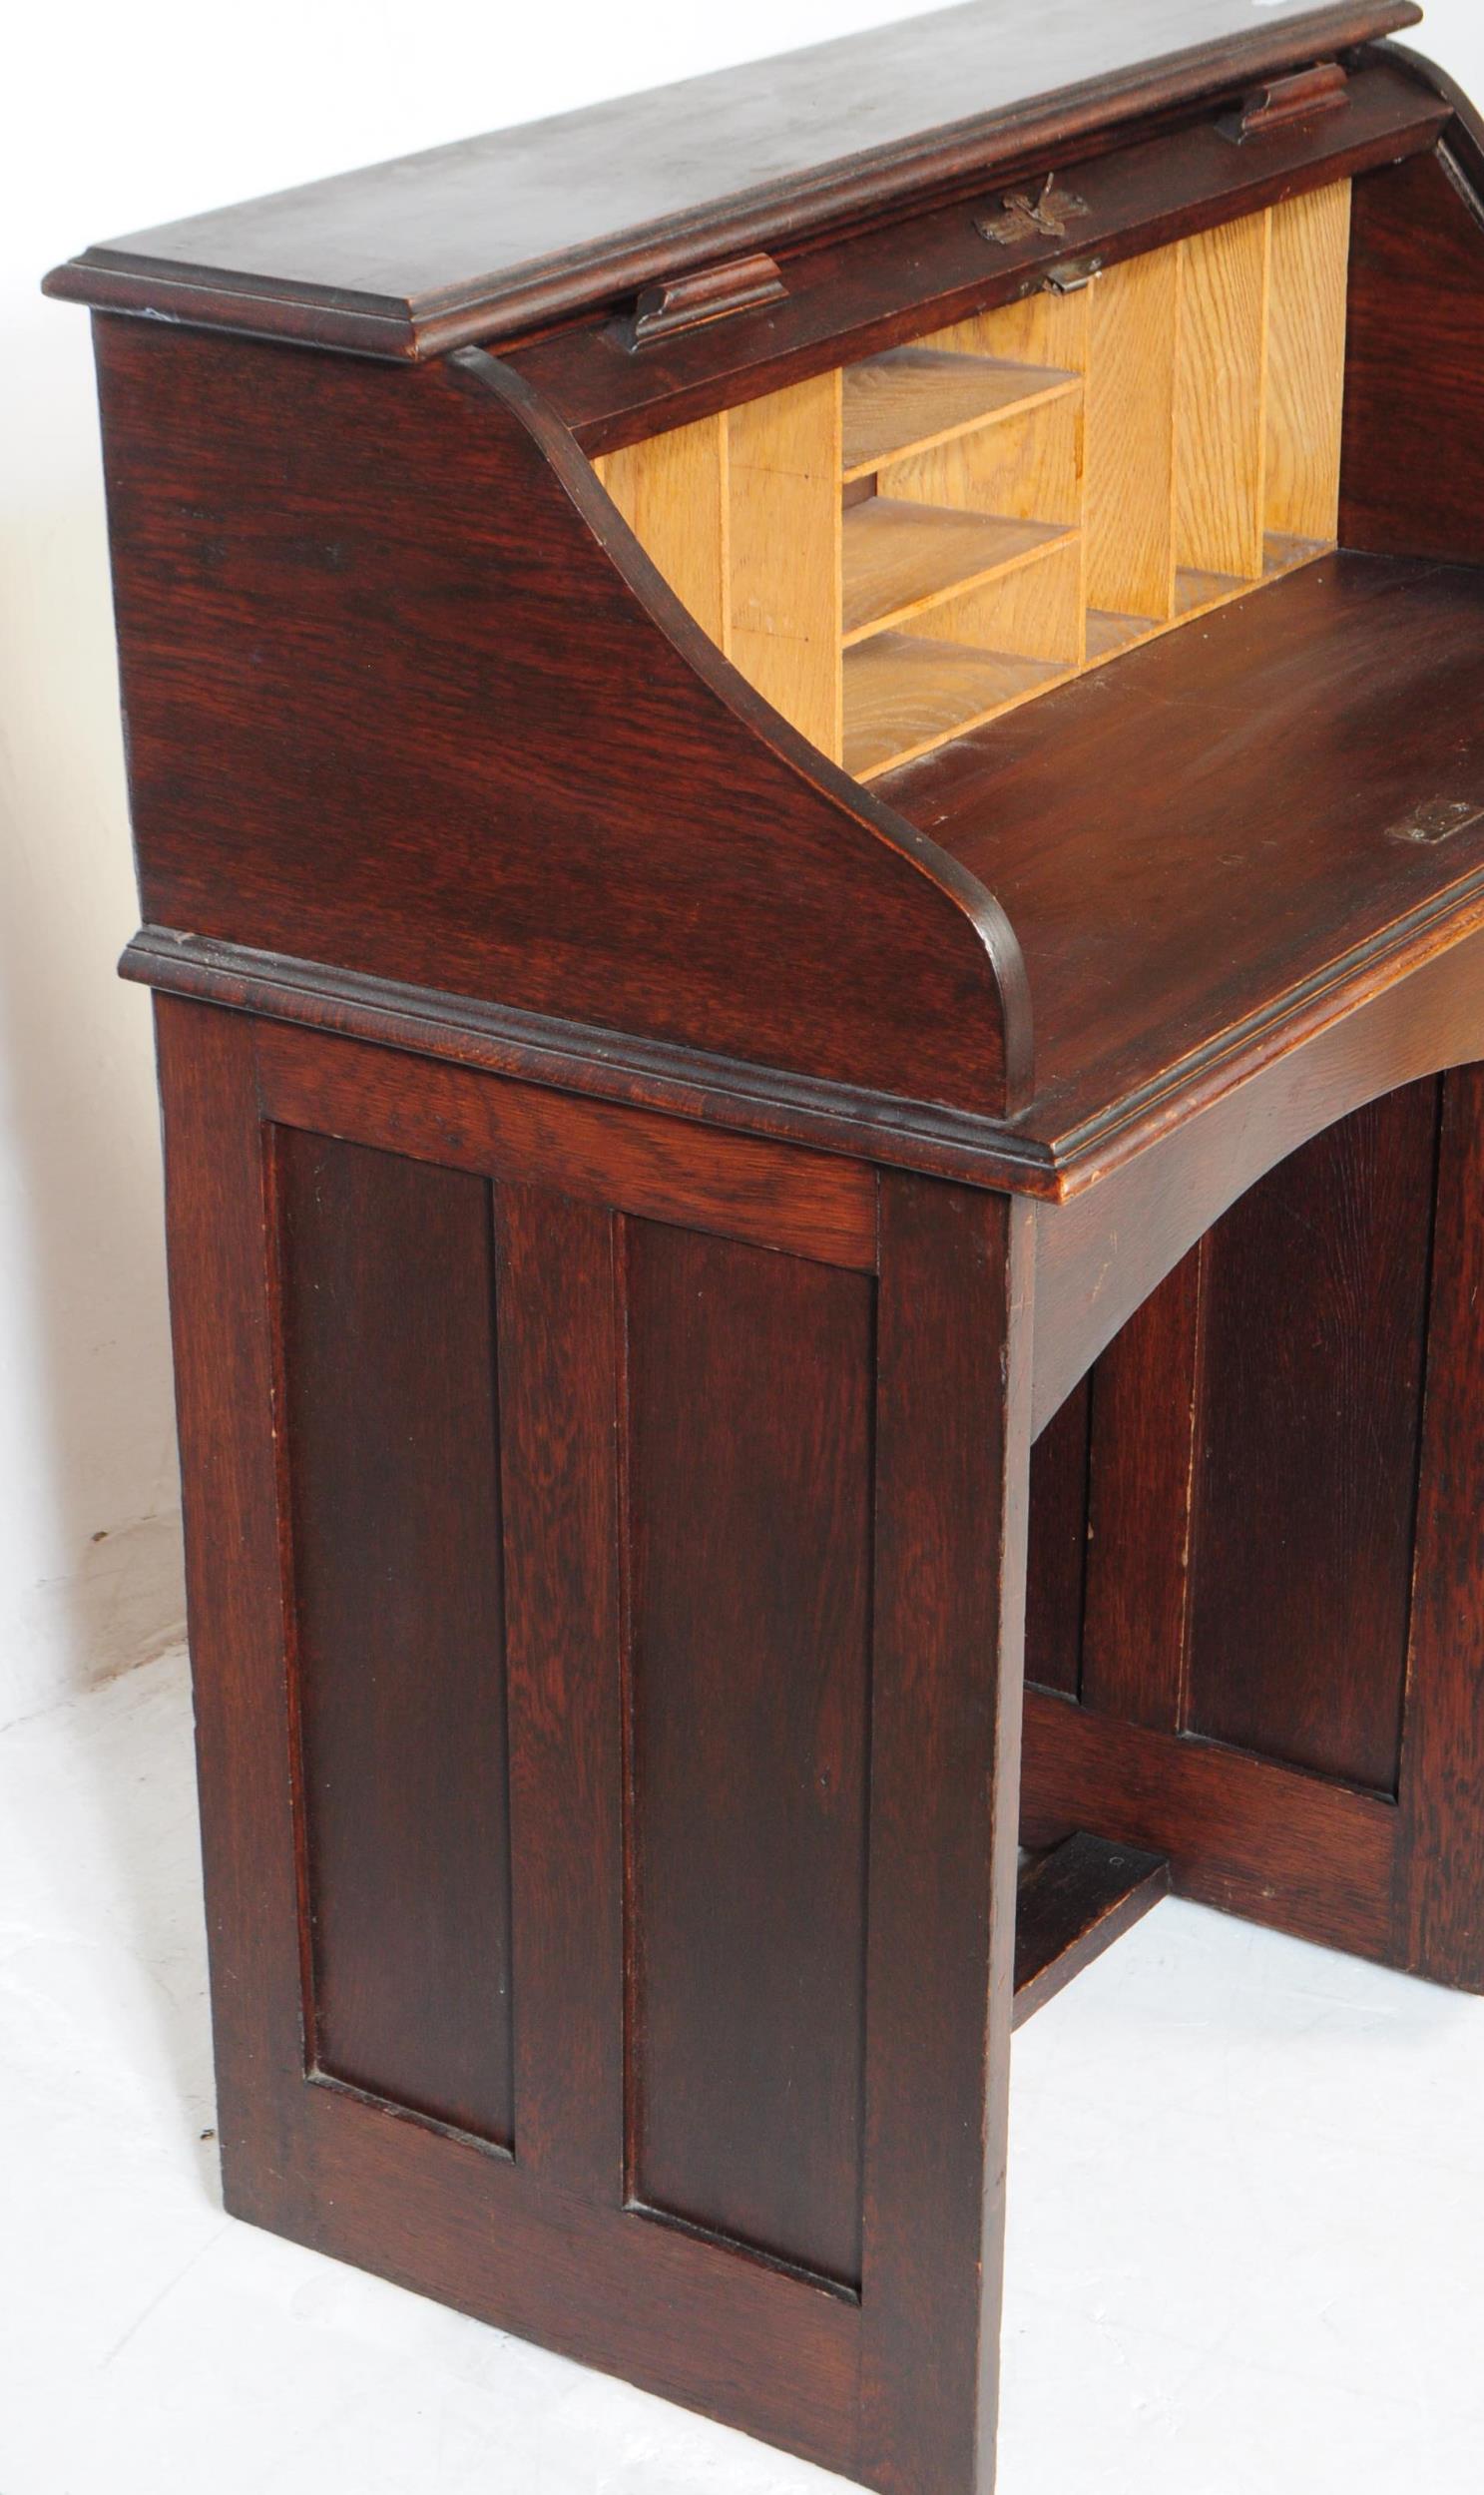 EARLY 20TH CENTURY MAHOGANY ROLL TOP DESK - Image 5 of 7